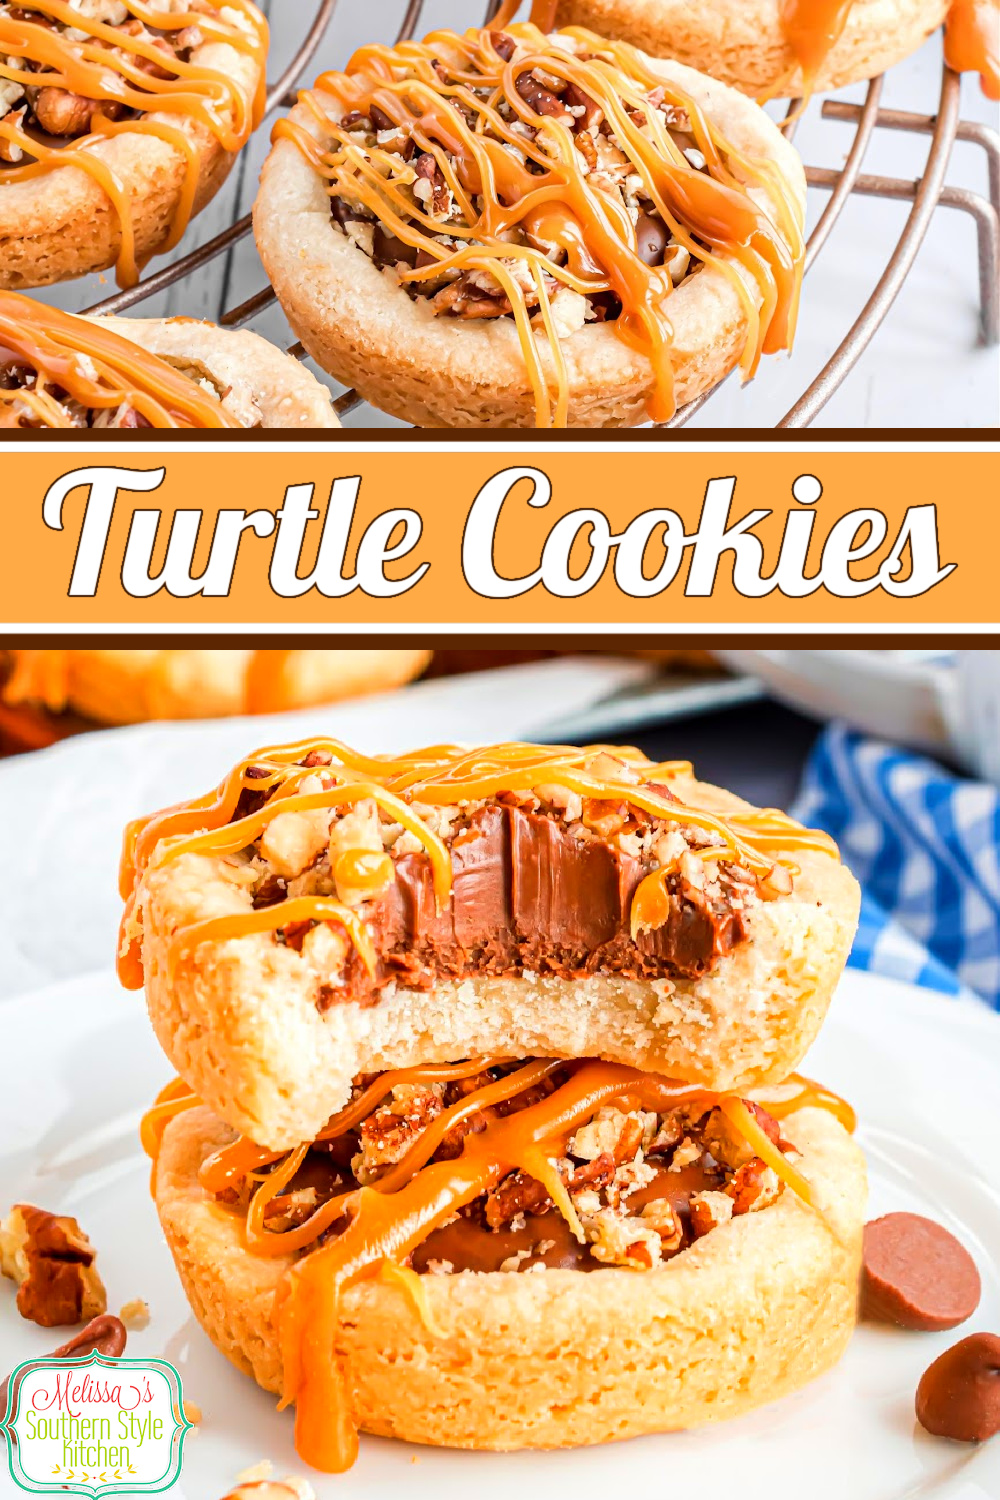 These scratch made Turtle Cookies are baked in a muffin pan to form a delicious cookie bowl to hold the ooey gooey turtle toppings. #turtlecookies #turtlecookiecups #turtles #chocolate #caramelcookies #pecans #pecancookies #cookiebowls via @melissasssk